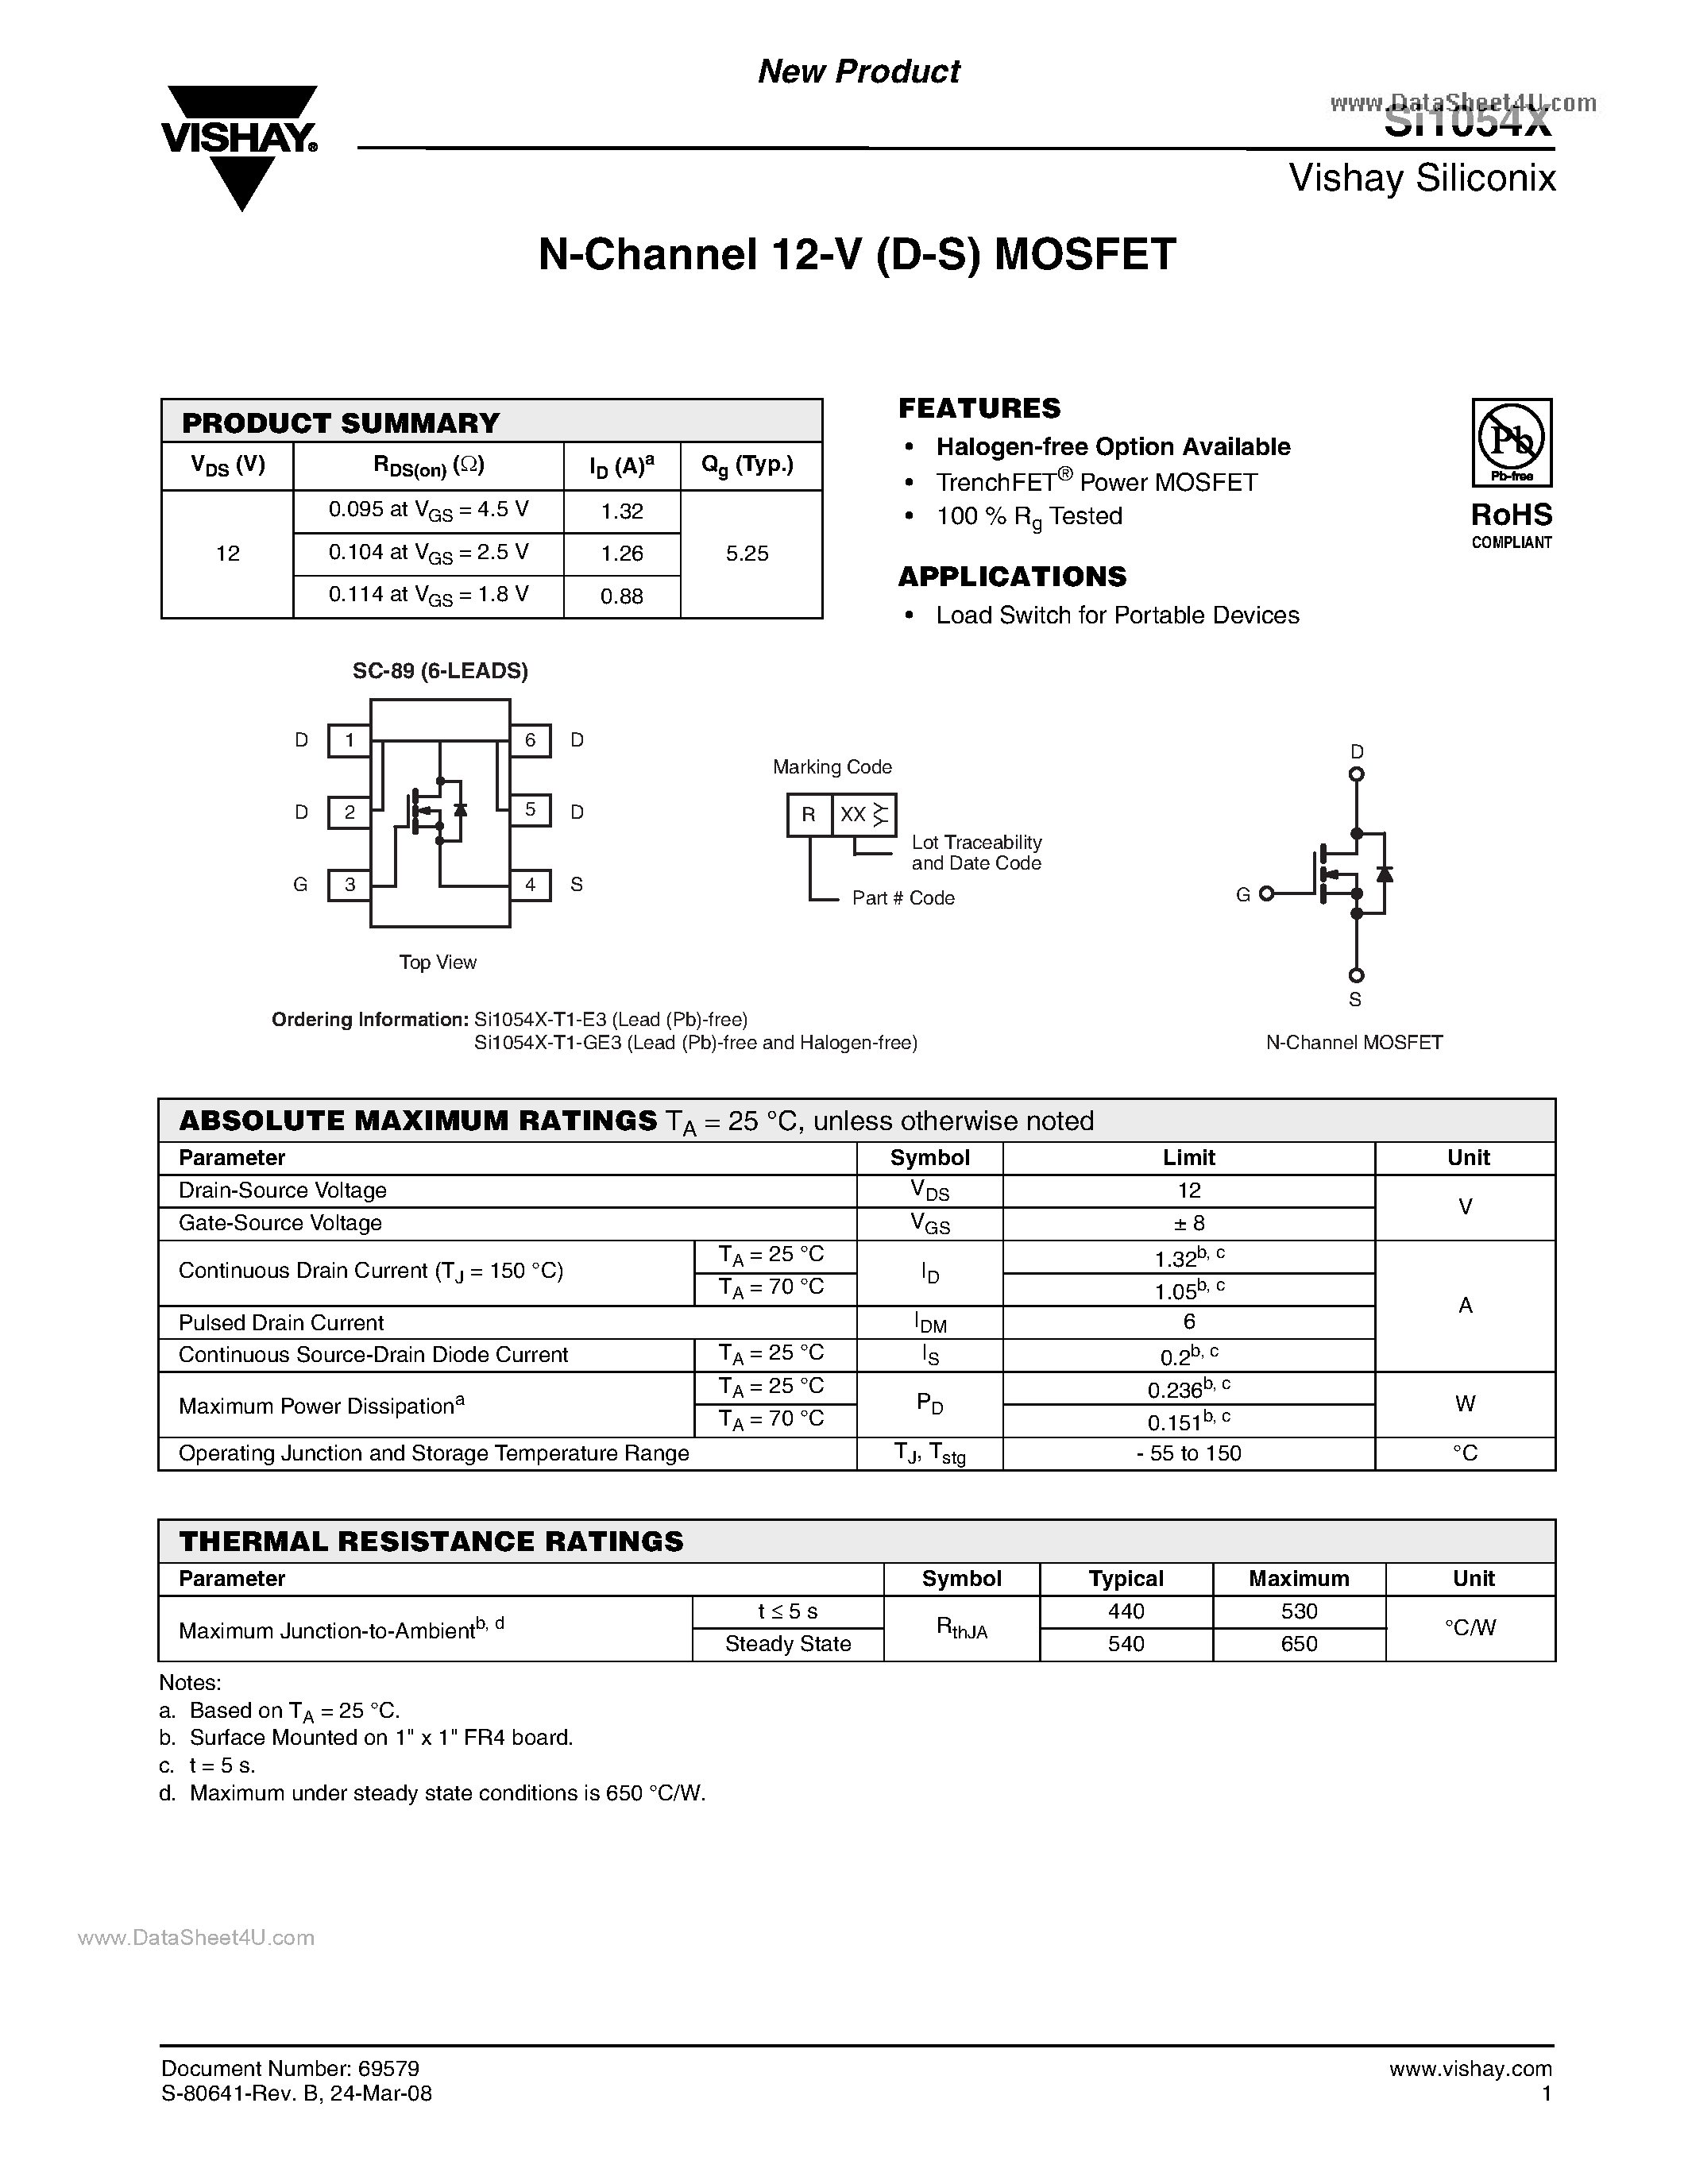 Datasheet SI1054X - N-Channel 12-V (D-S) MOSFET page 1